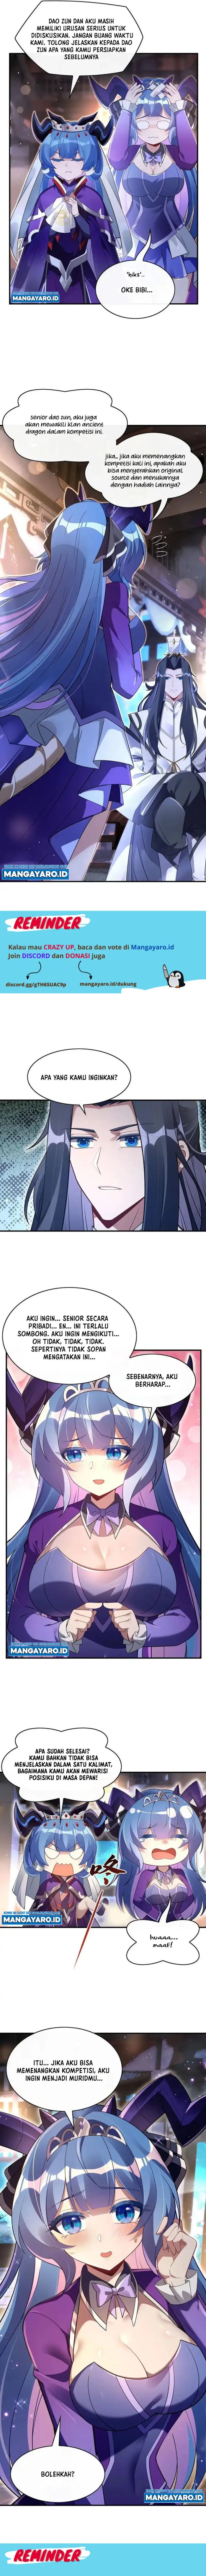 Dilarang COPAS - situs resmi www.mangacanblog.com - Komik my female apprentices are all big shots from the future 276 - chapter 276 277 Indonesia my female apprentices are all big shots from the future 276 - chapter 276 Terbaru 8|Baca Manga Komik Indonesia|Mangacan